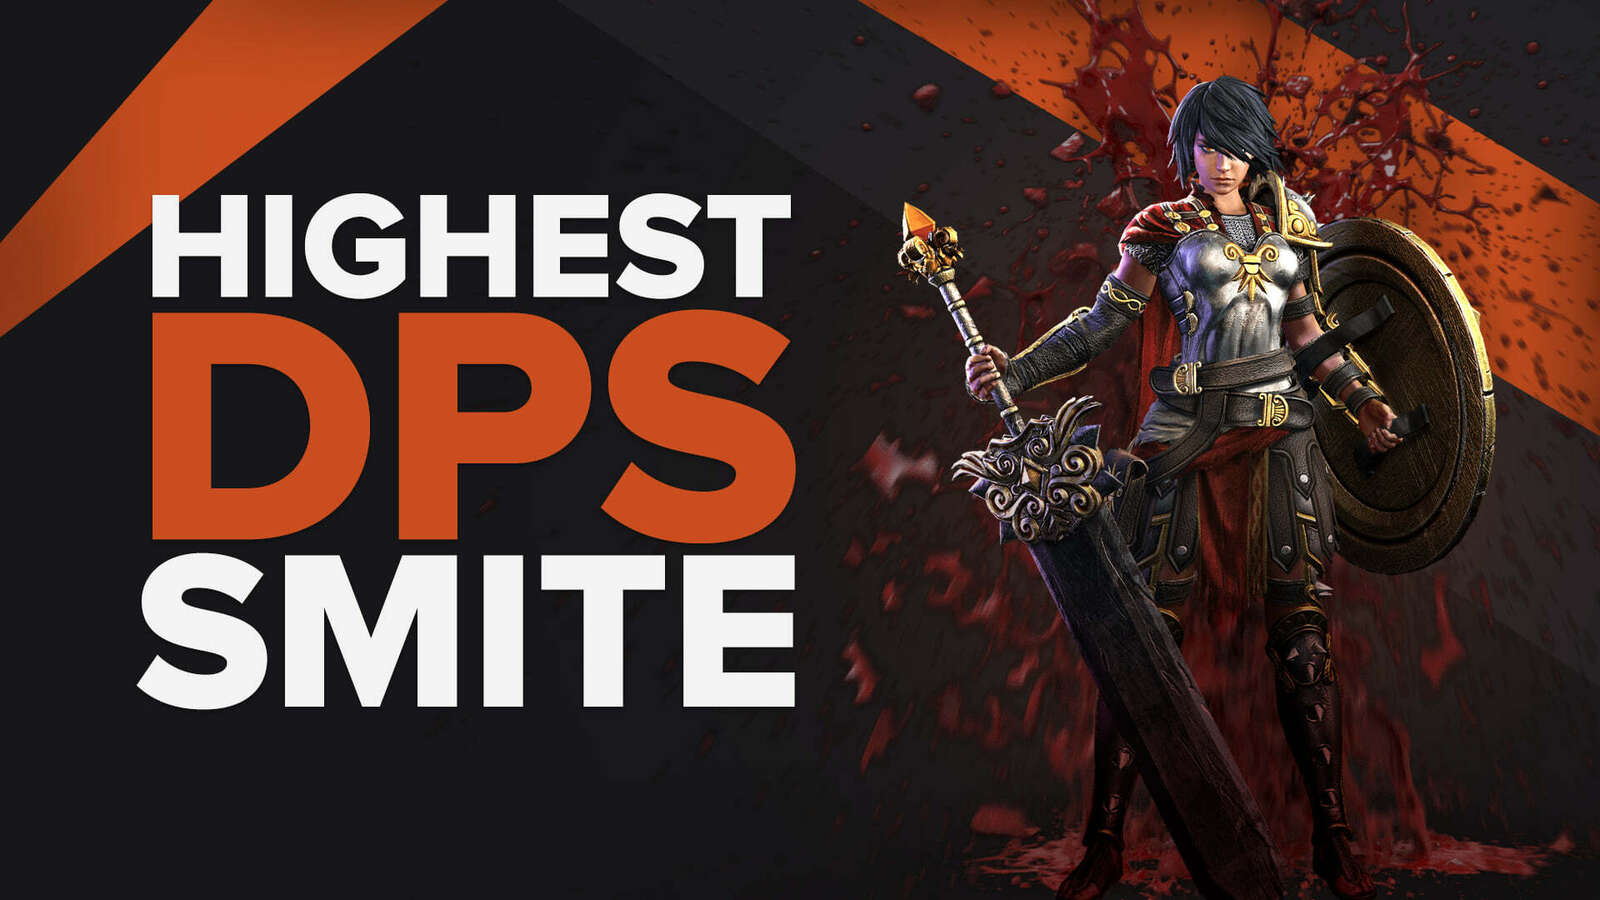 Who has the highest DPS in Smite?